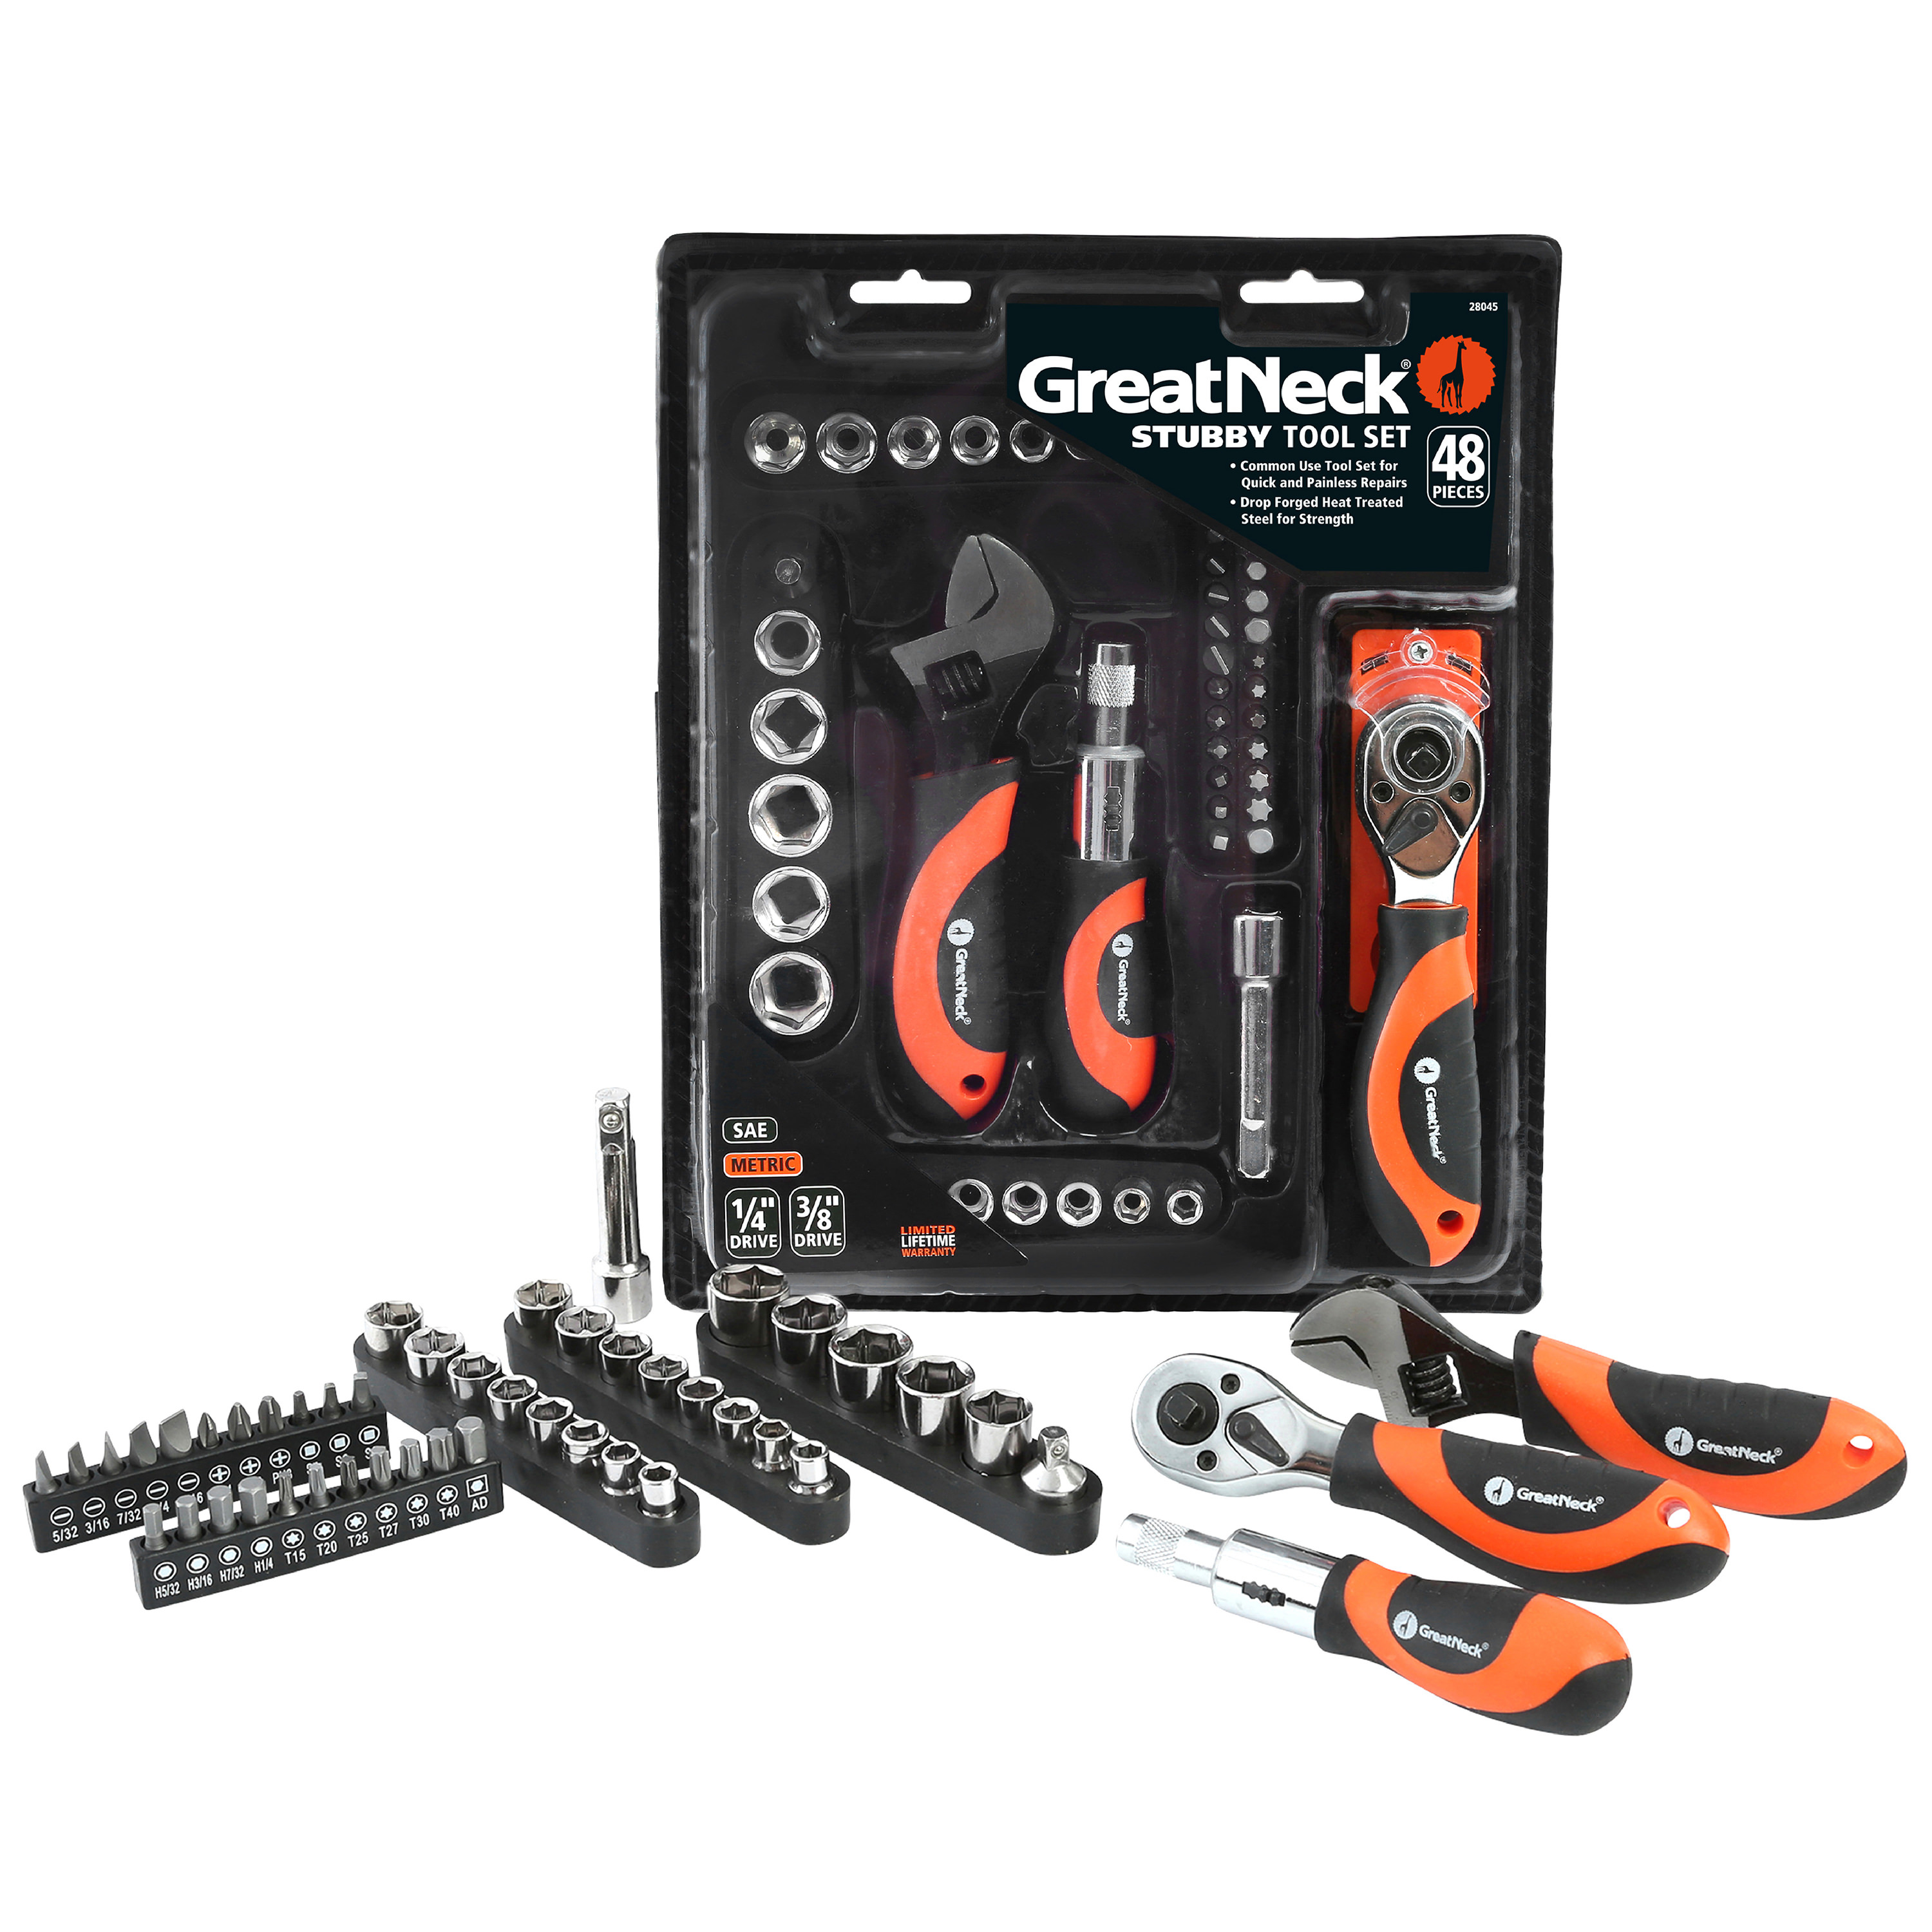 GreatNeck 28045 Multi Drive Stubby Tool Set - image 1 of 11